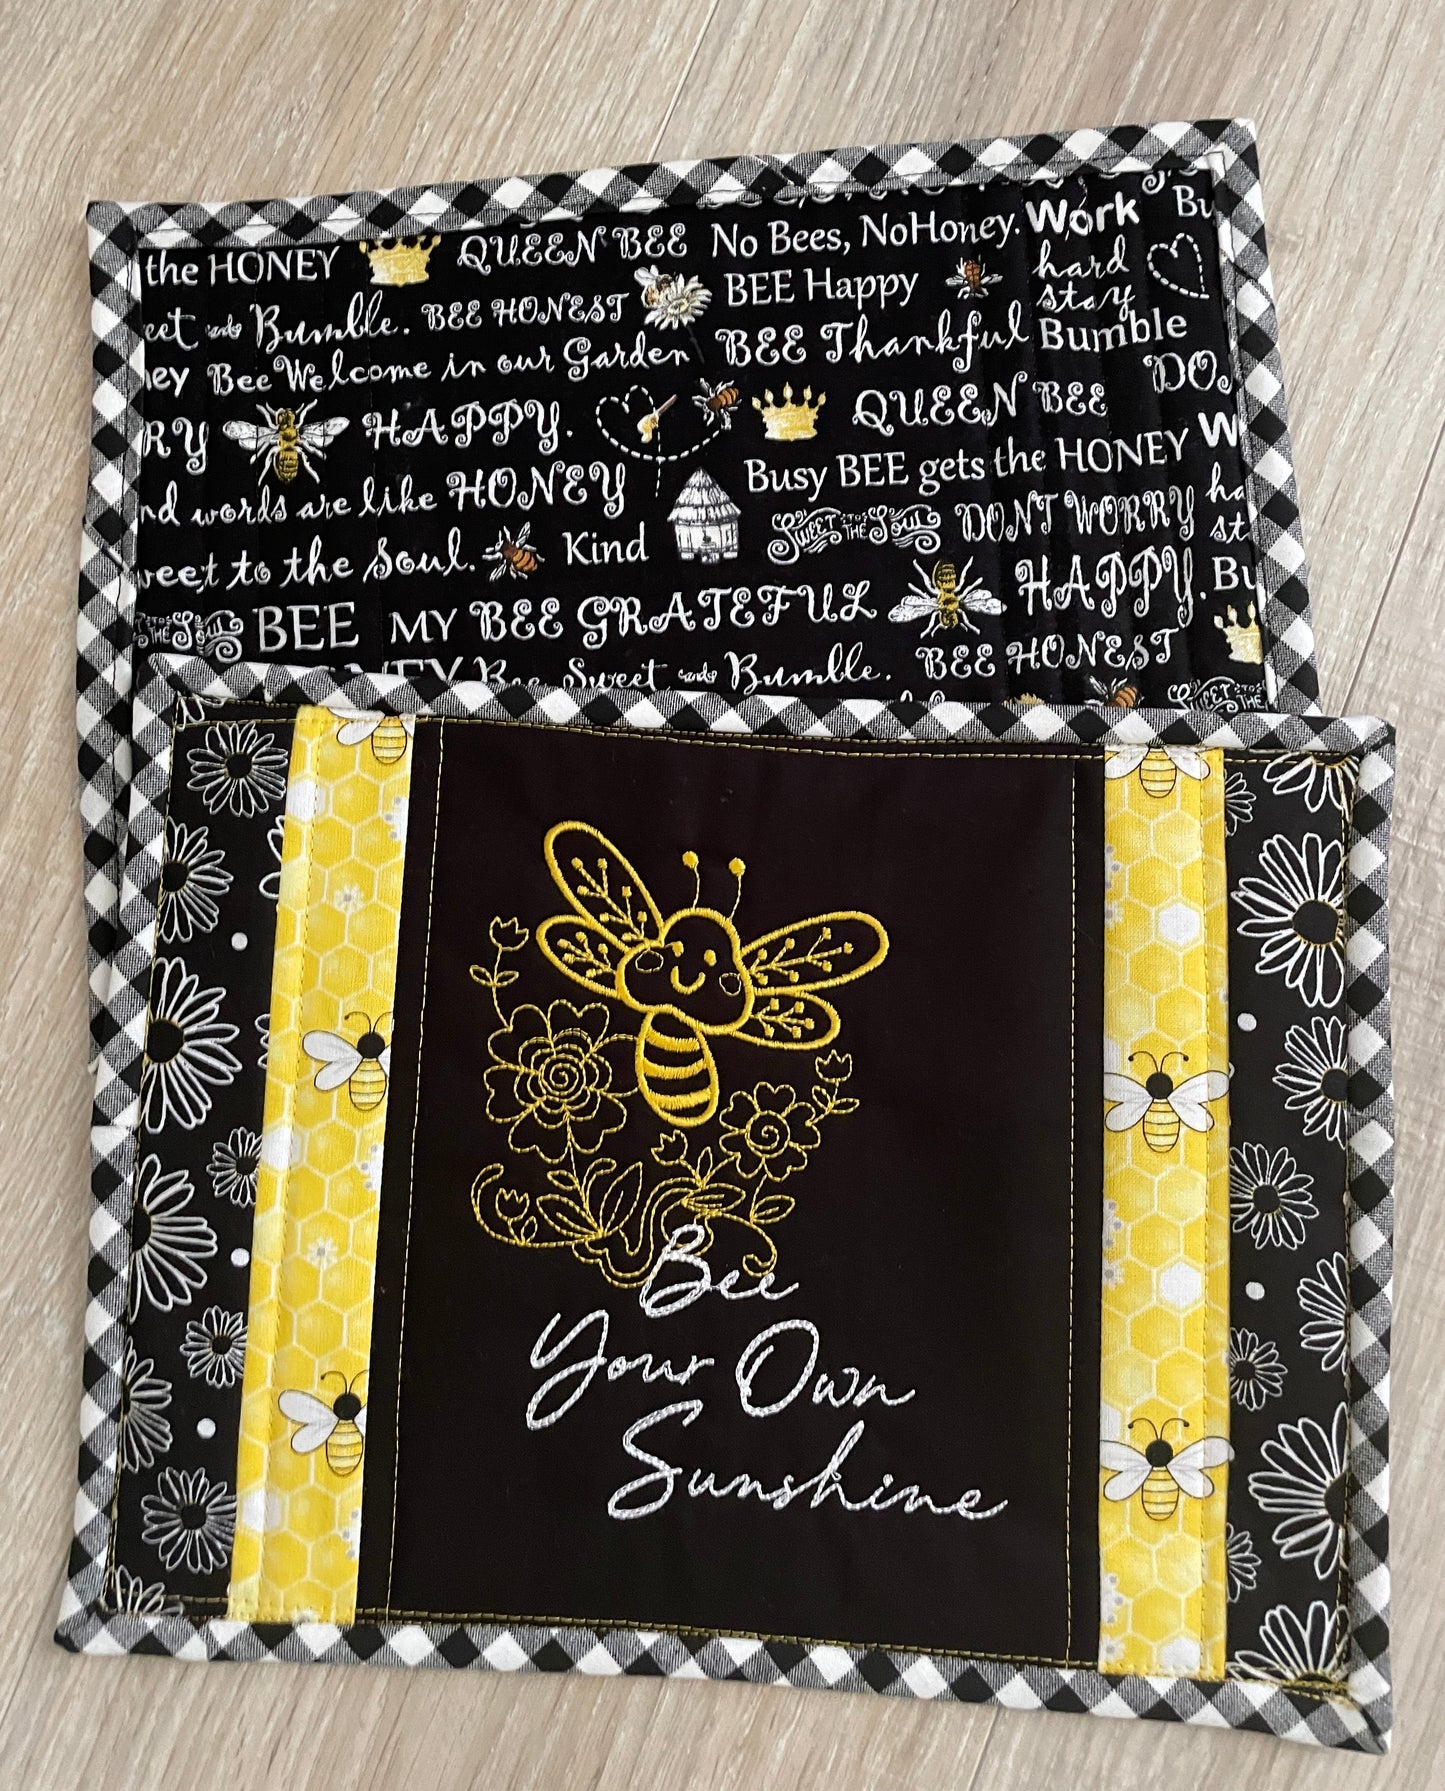 Quilted Bee Themed Fabric Mug Rug/ Coasters, Handmade Drink Protectors